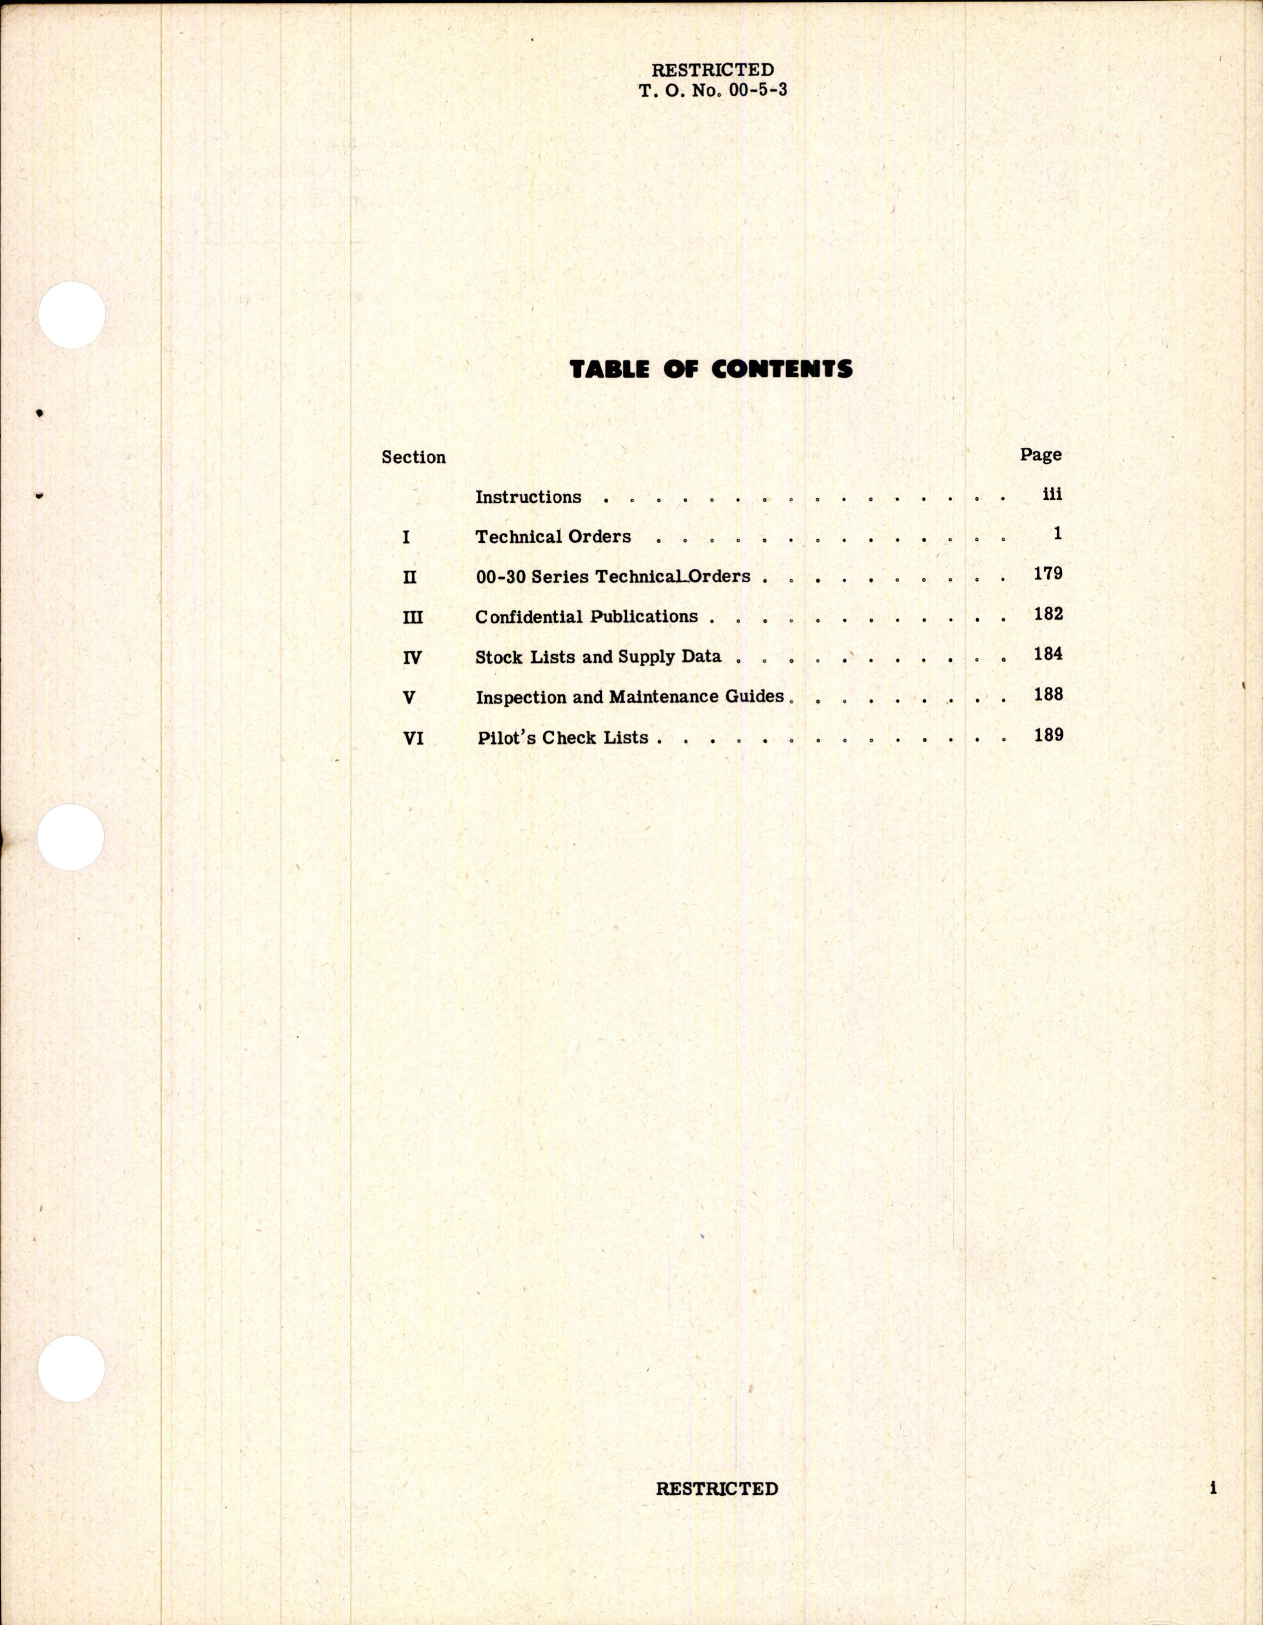 Sample page 3 from AirCorps Library document: Publications Requirement Table